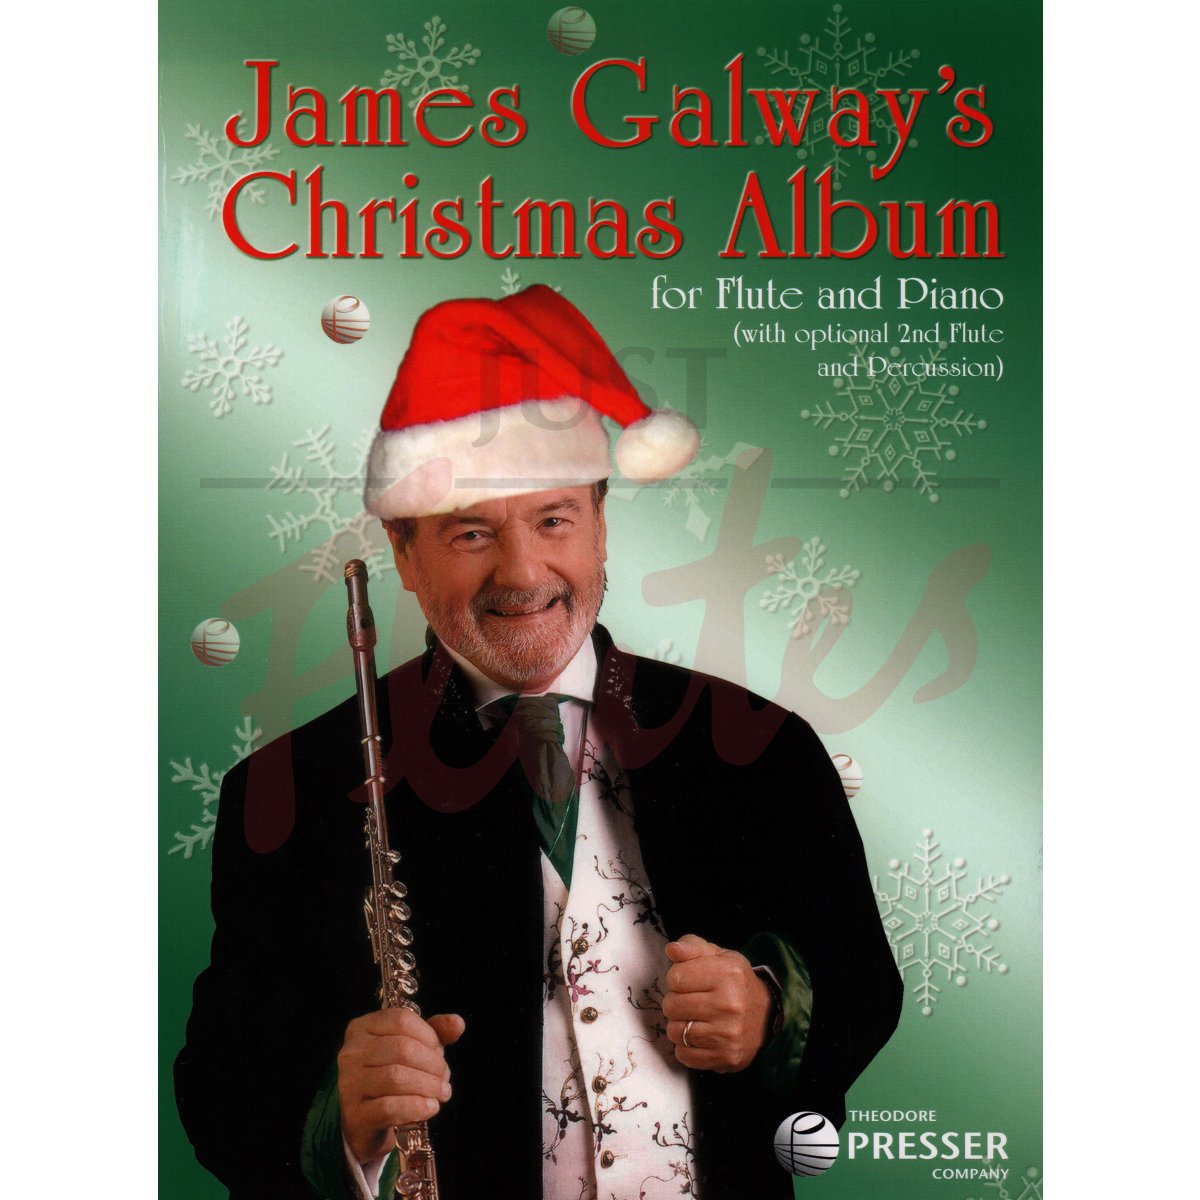 James Galway's Christmas Album for Flute and Piano